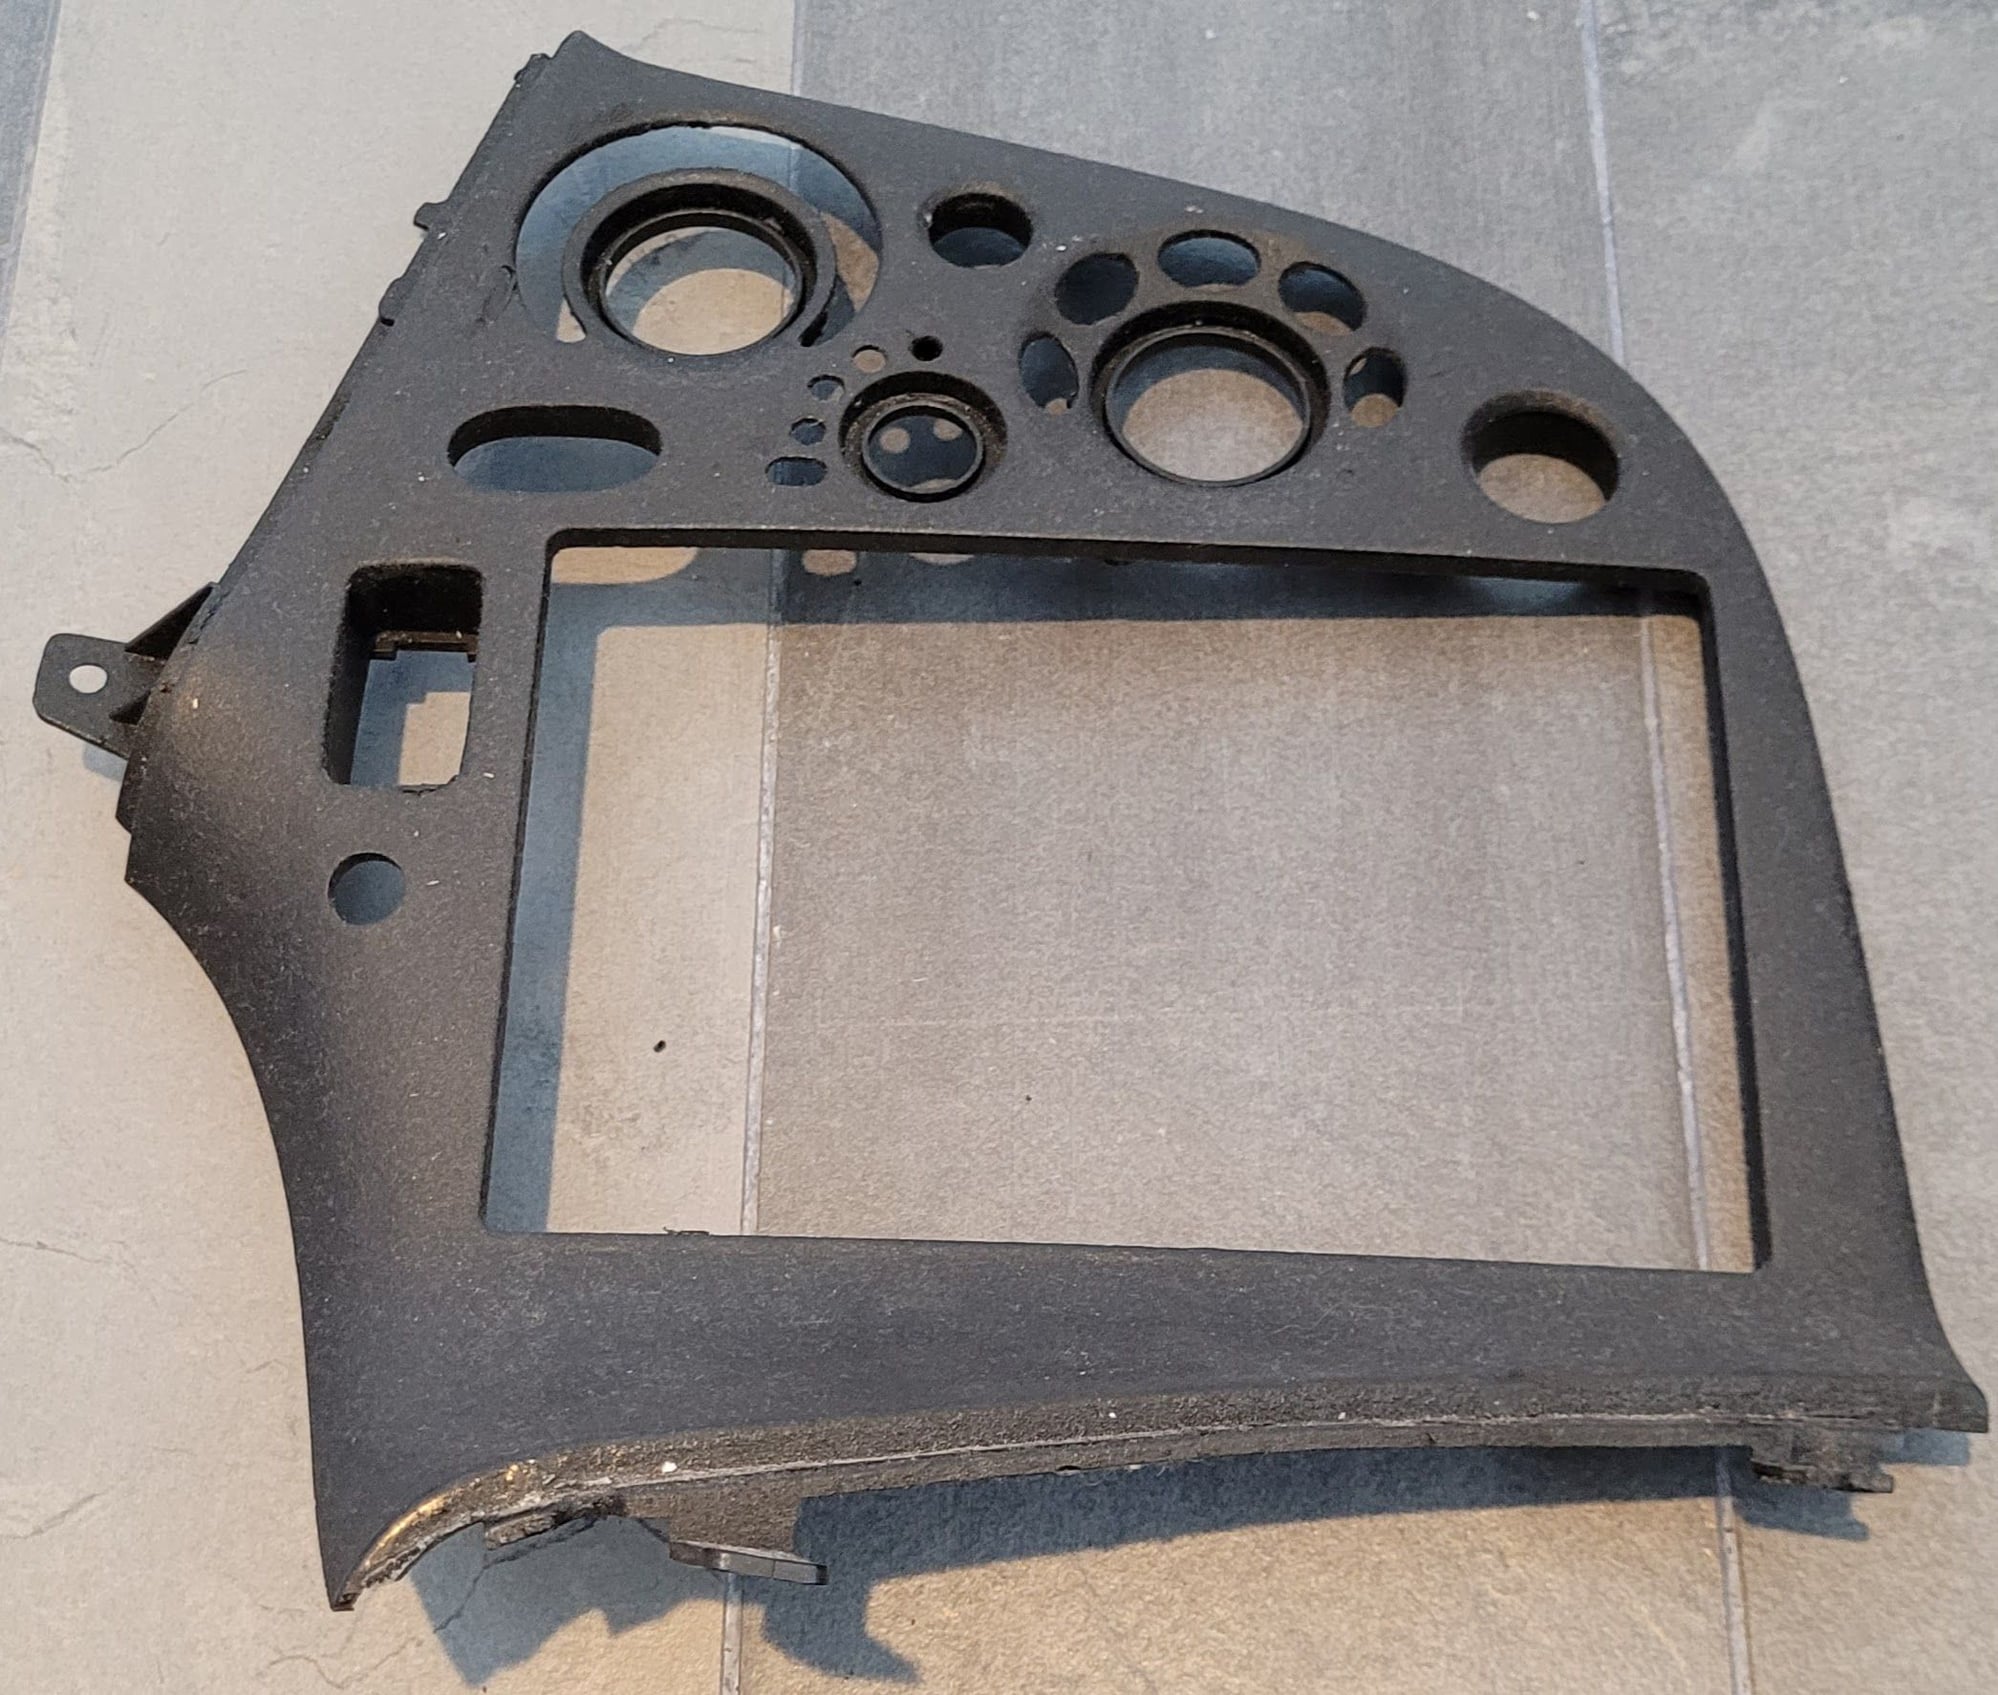 Interior/Upholstery - Steering Wheels, Dash Panels, ECU R1 Bar Feet, Center Amp, Other Bits - Used - 1993 to 1995 Mazda RX-7 - Clifton, NJ 07012, United States